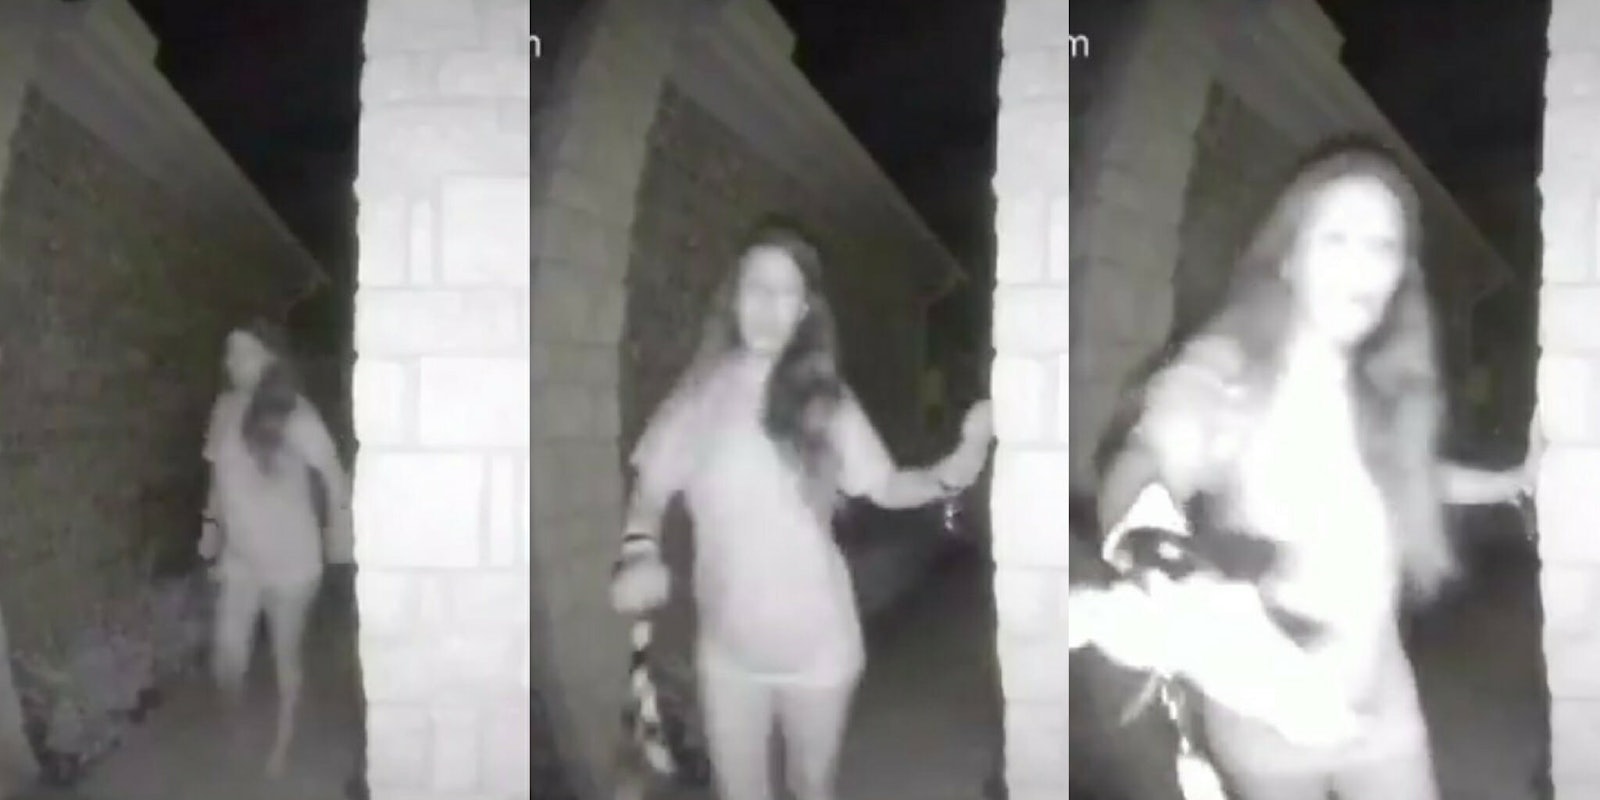 A Ring doorbell camera recorded a Texas woman who was frantically going door to door at night.